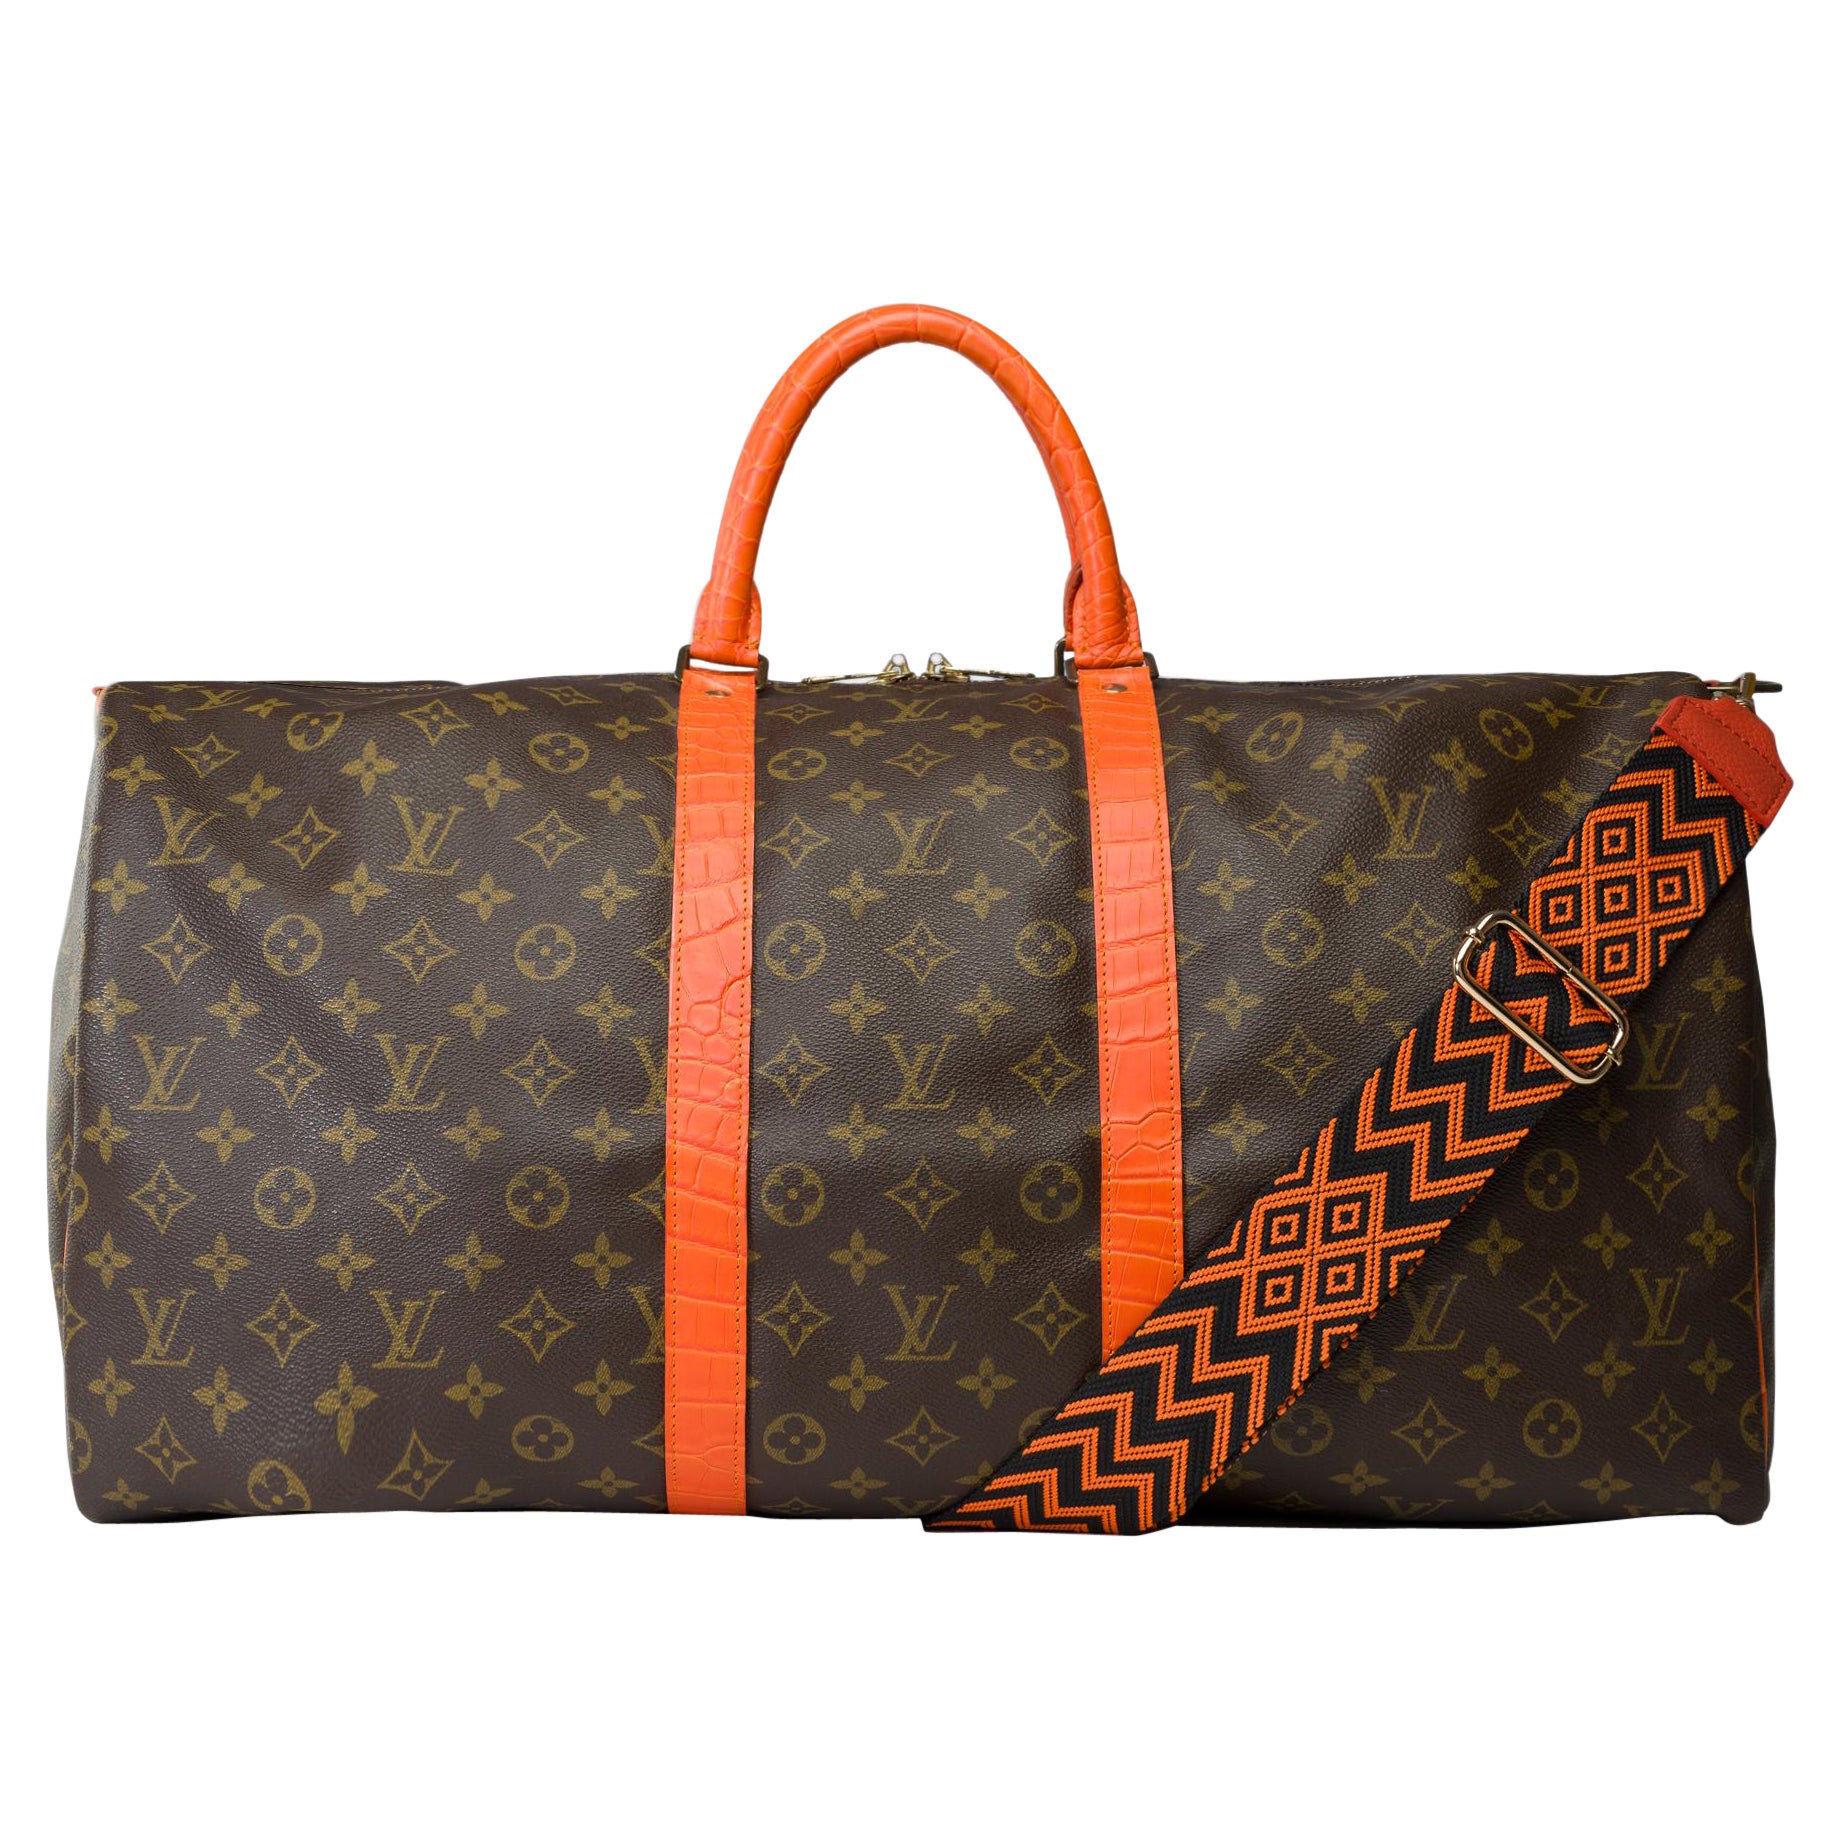 Customized Louis Vuitton Keepall 55 strap Travel bag with Orange Crocodile For Sale